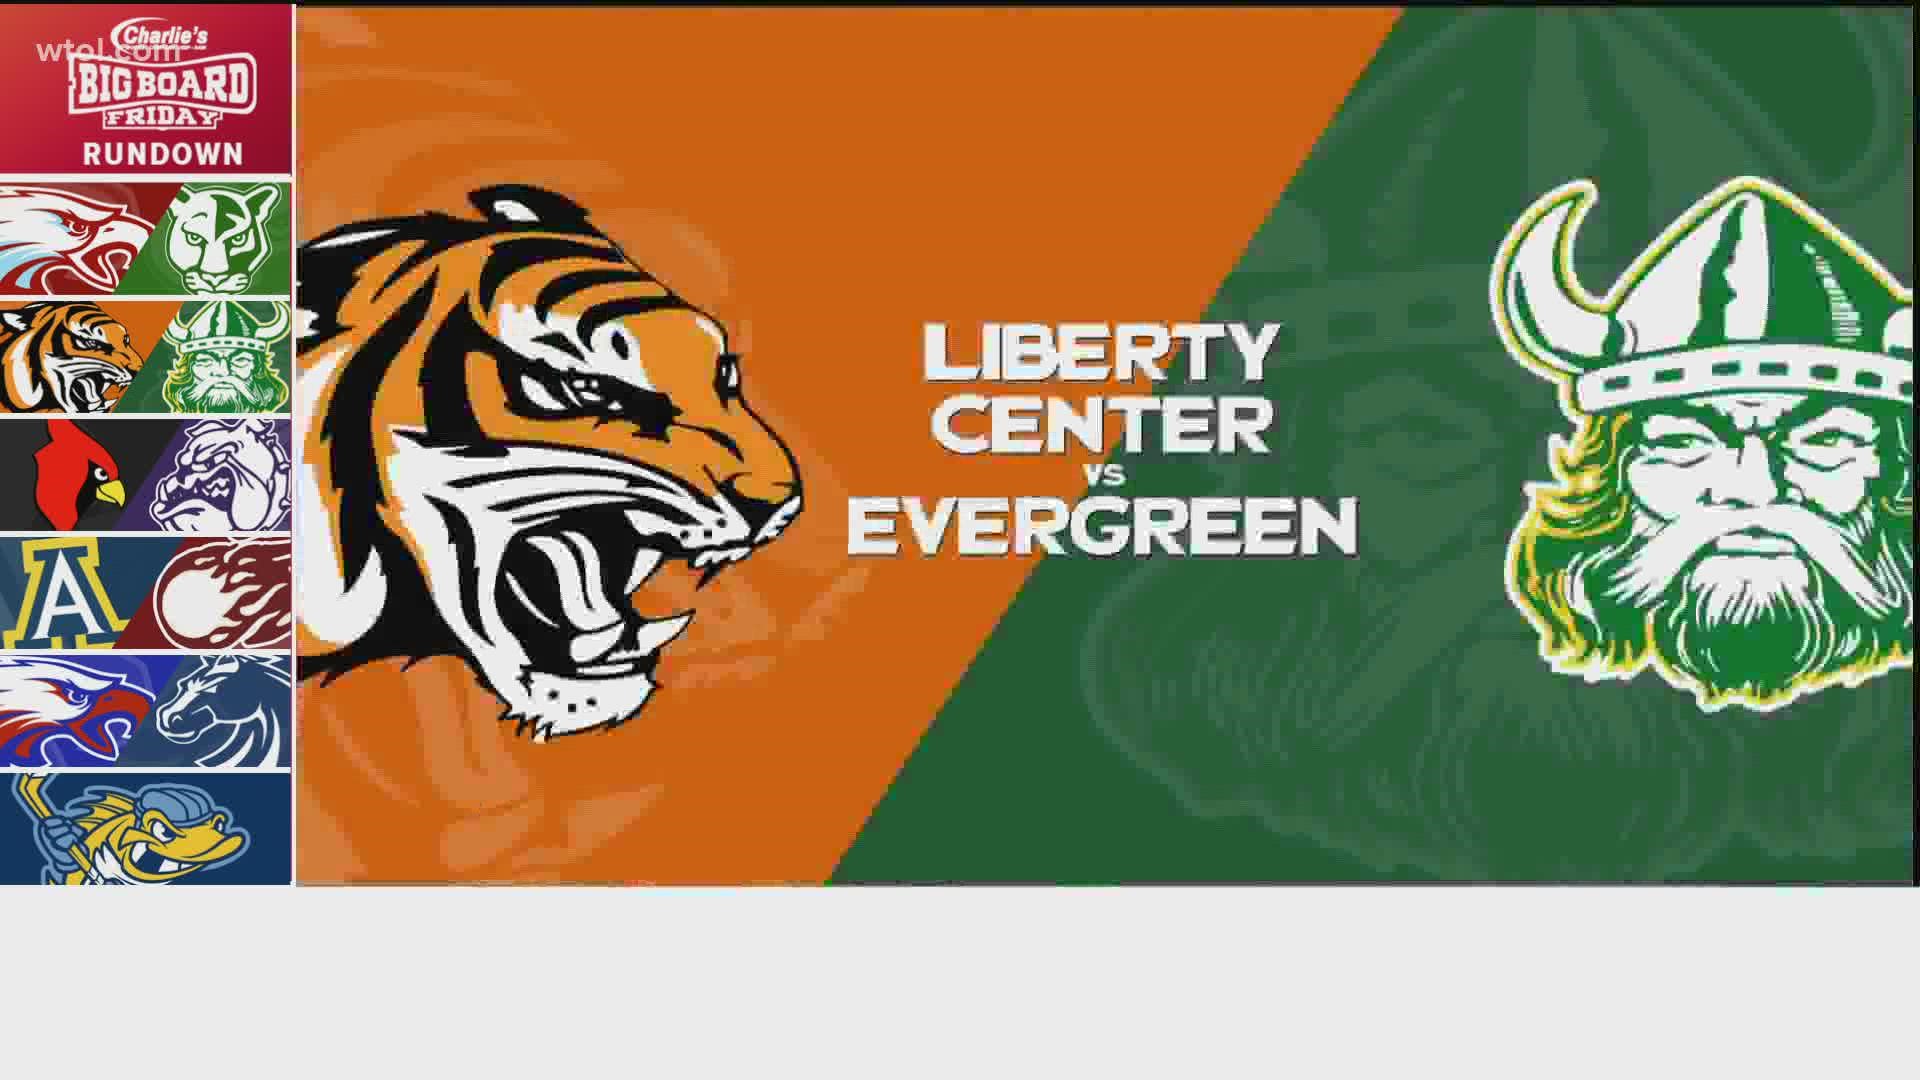 Liberty Center had a huge win against Ottawa Hills earlier this week. Tonight taking on Evergreen.